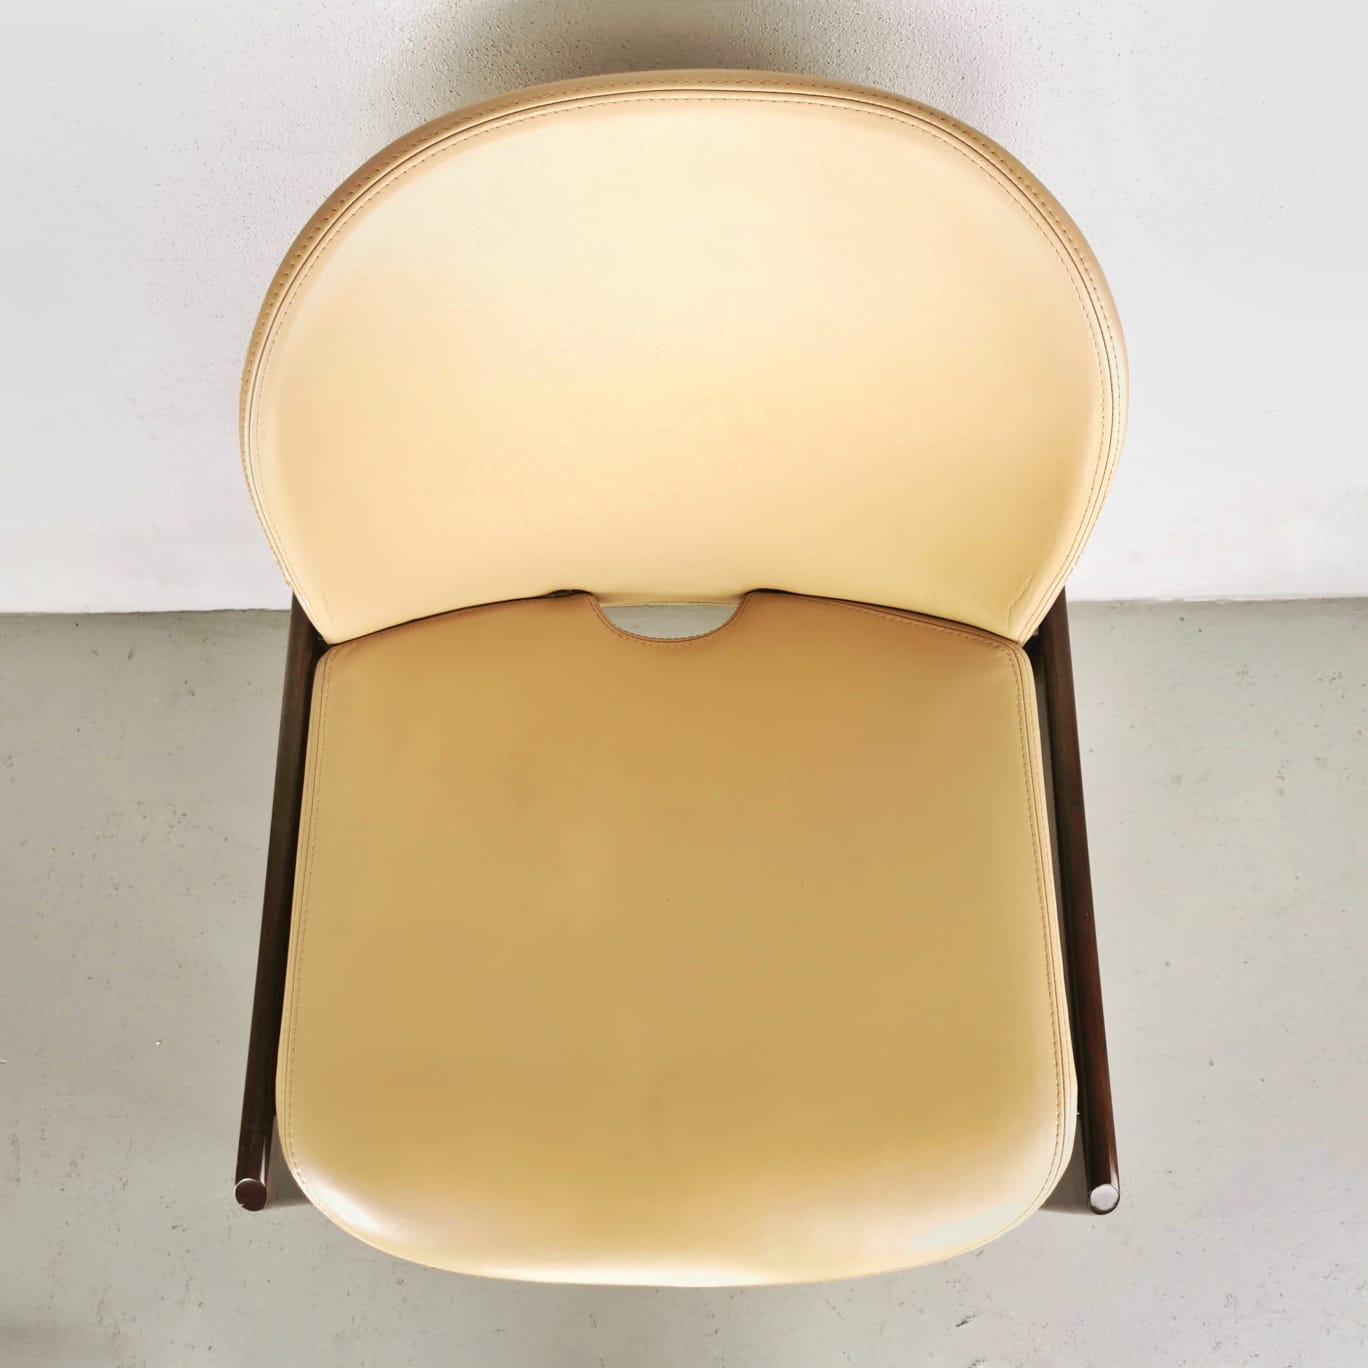 6 Afra and Tobia Scarpa Dialogo chairs for B&amp;B Italia 1973